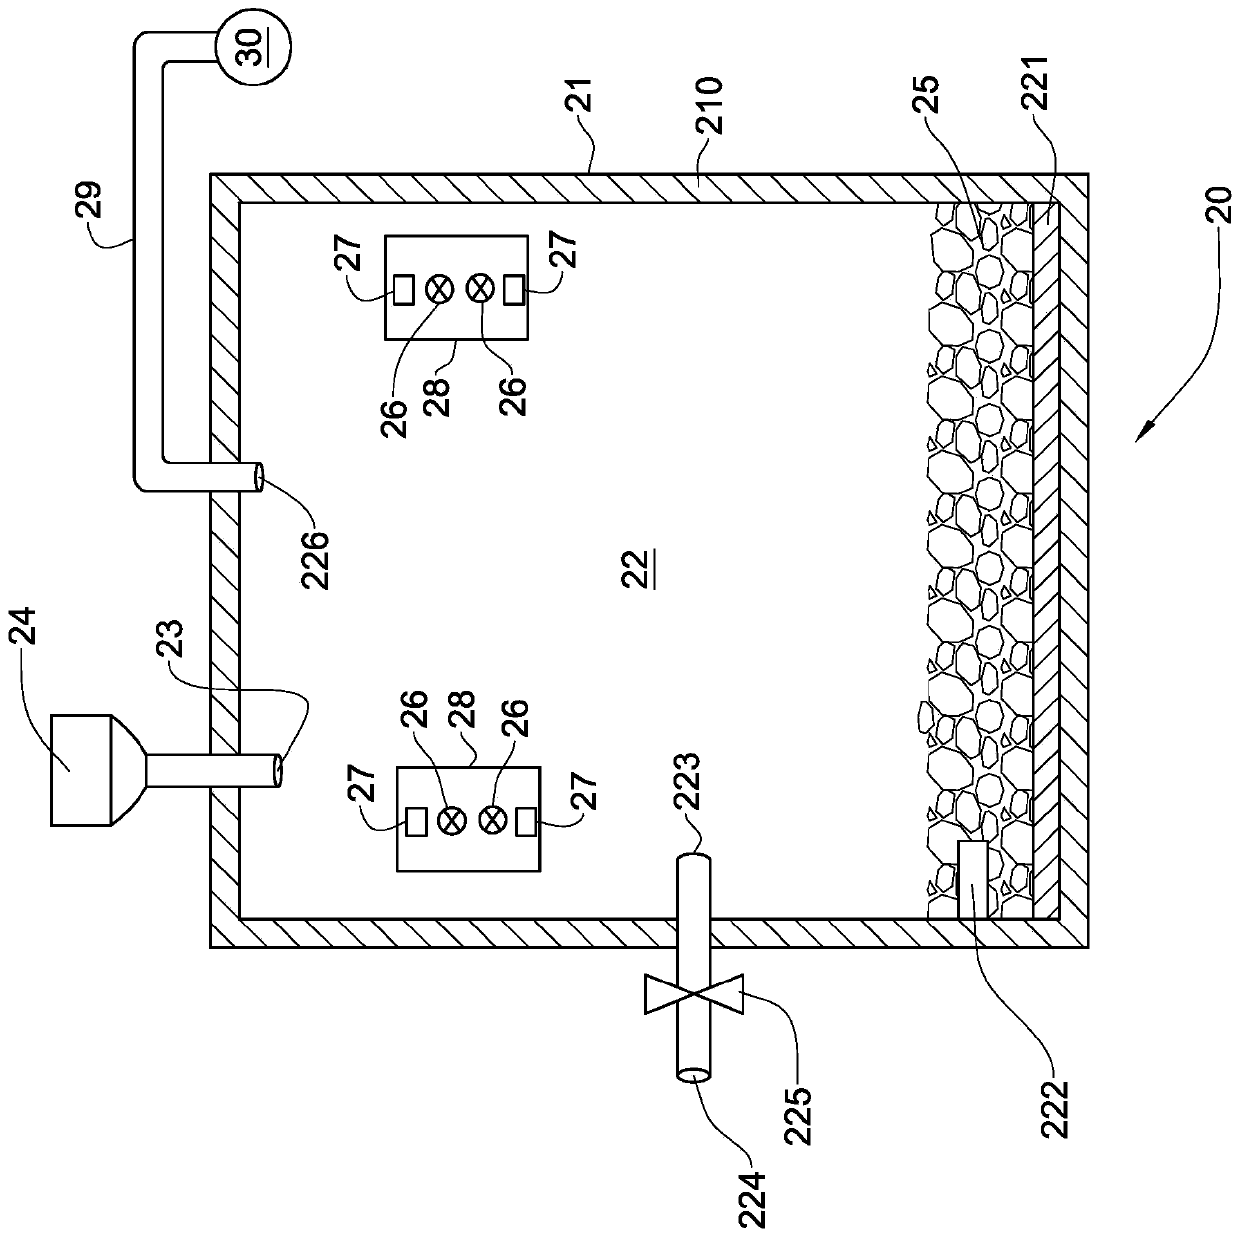 Method for gold recovery and extraction from electronic waste or gold containing minerals, ores and sands